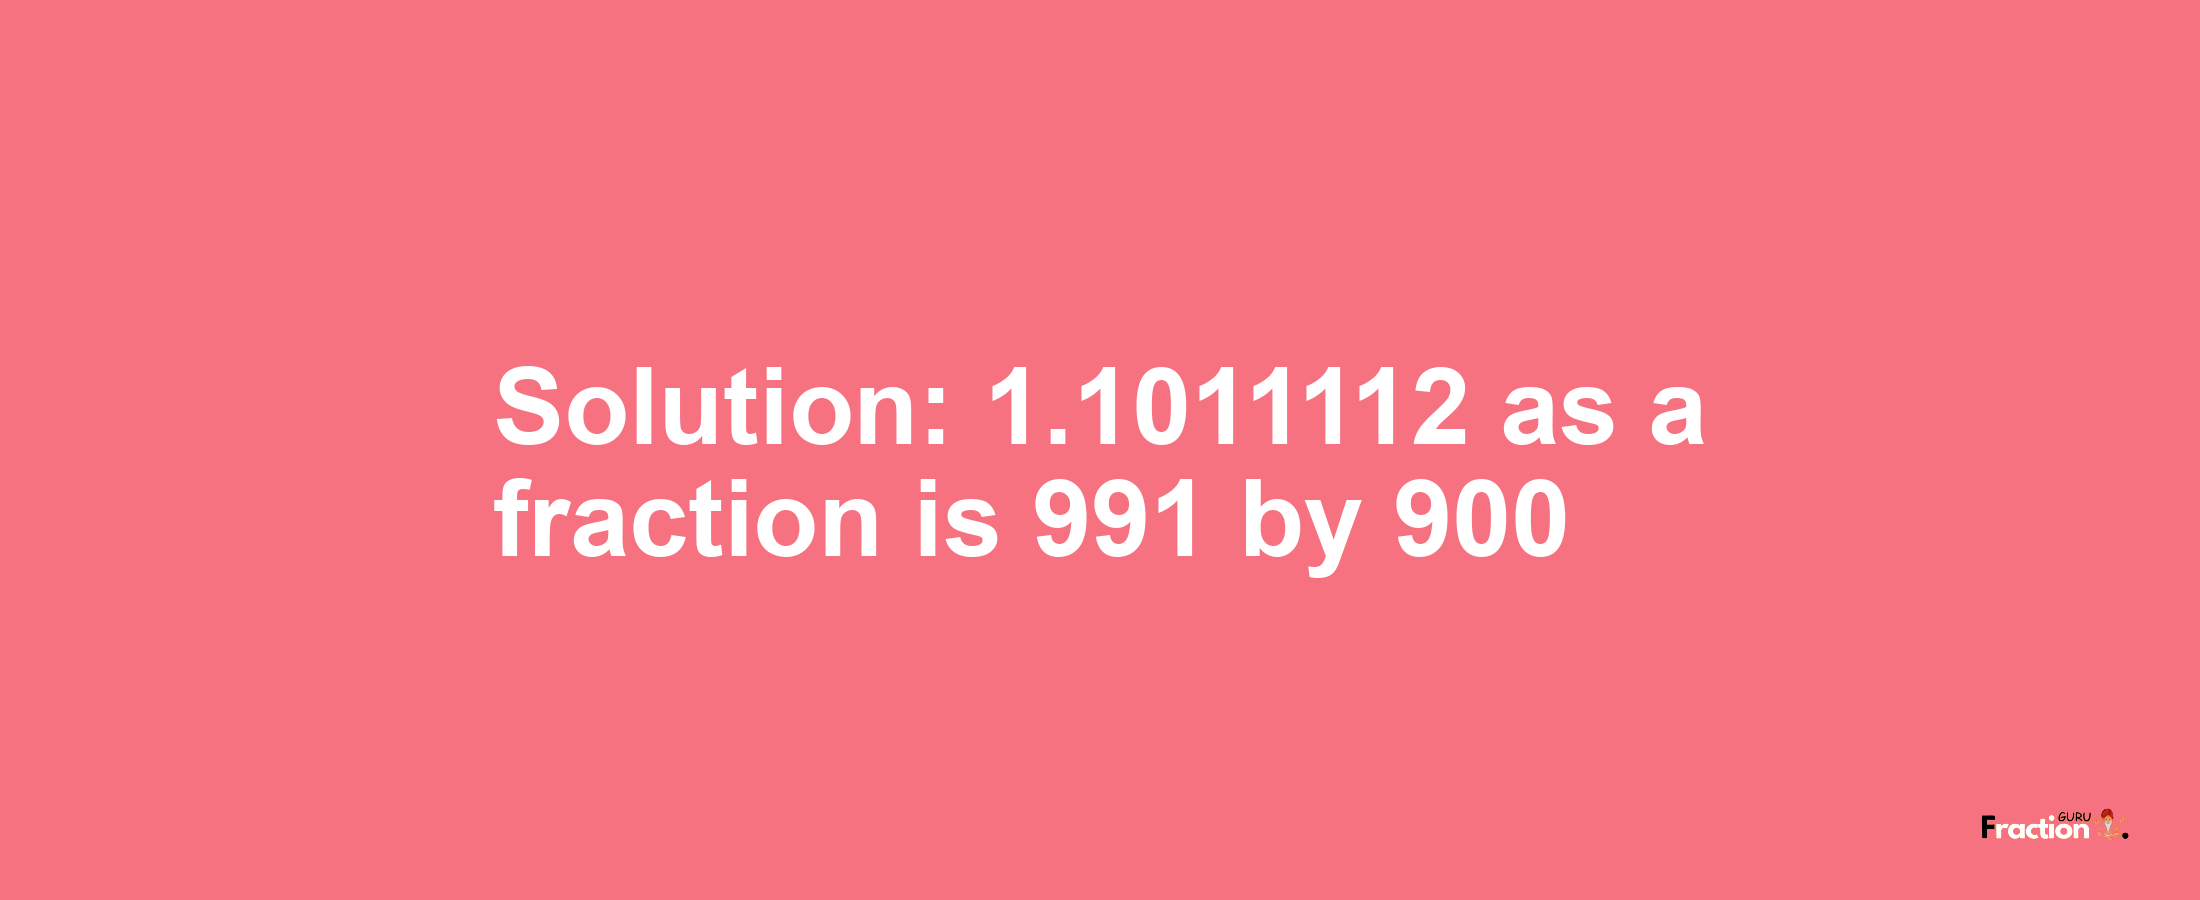 Solution:1.1011112 as a fraction is 991/900